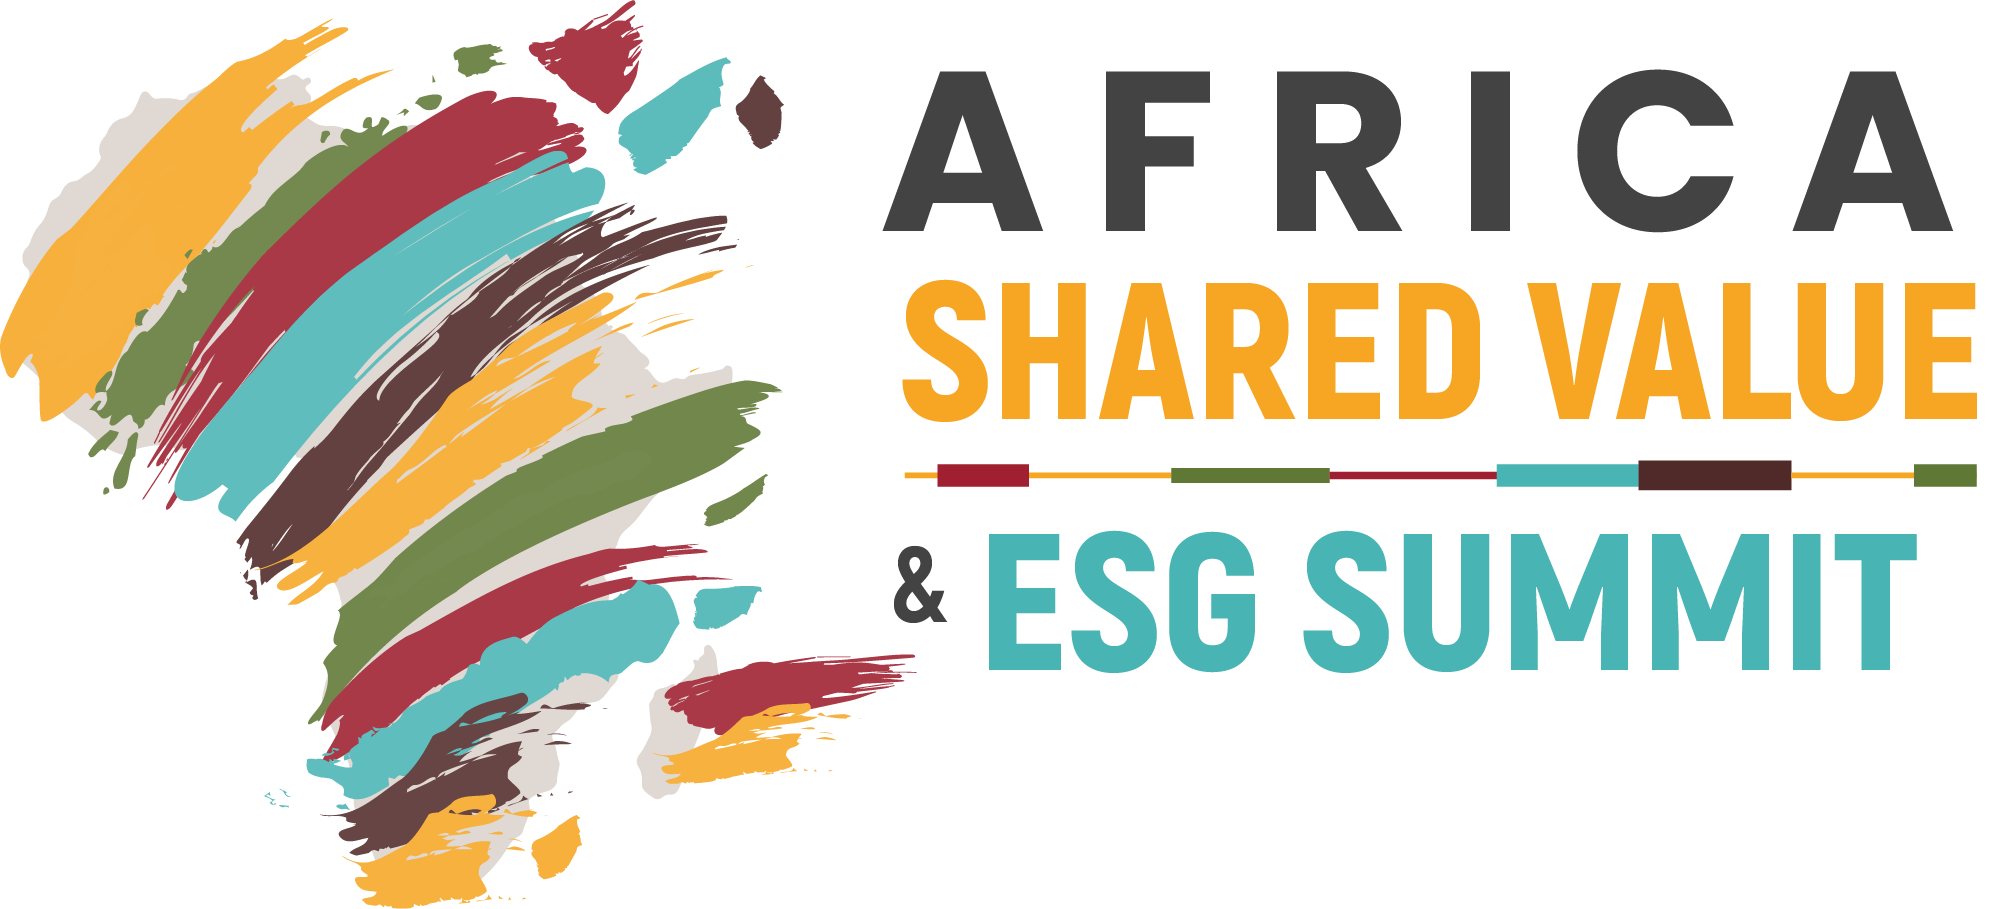 The inaugural Africa Shared Value and ESG Summit  